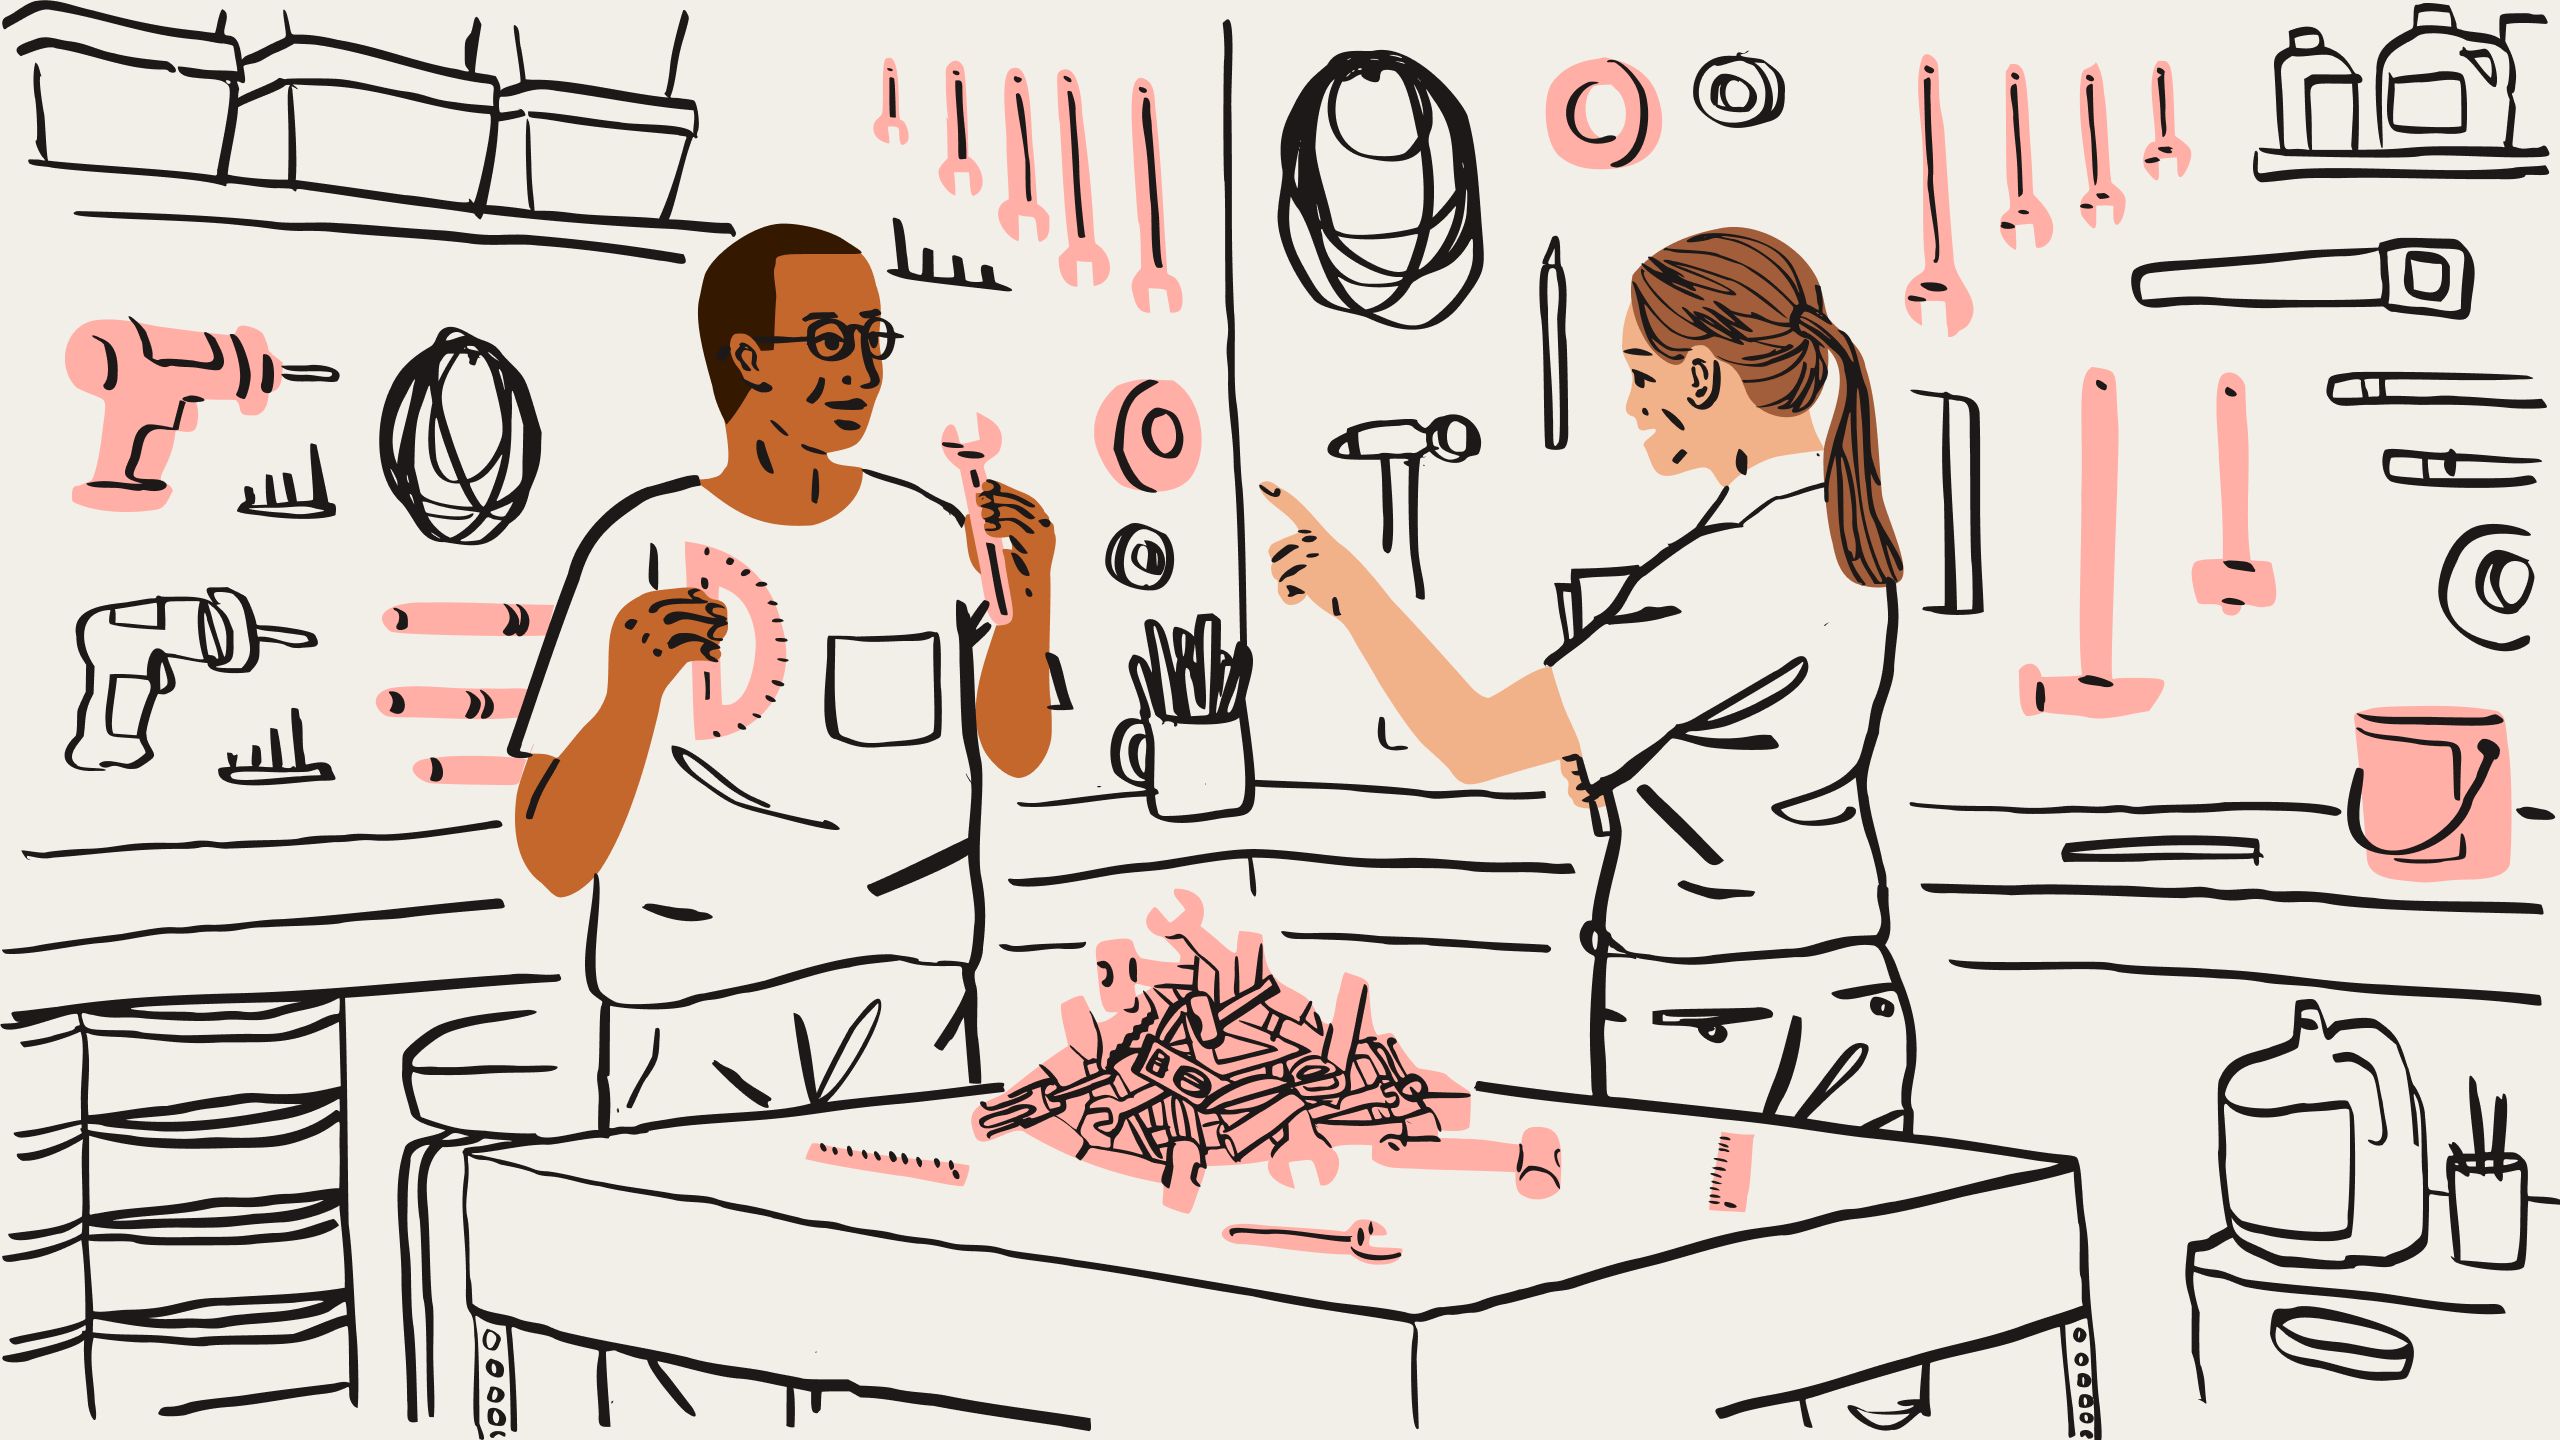 An illustration of two people sorting through a pile of tools, including wrenches and rulers